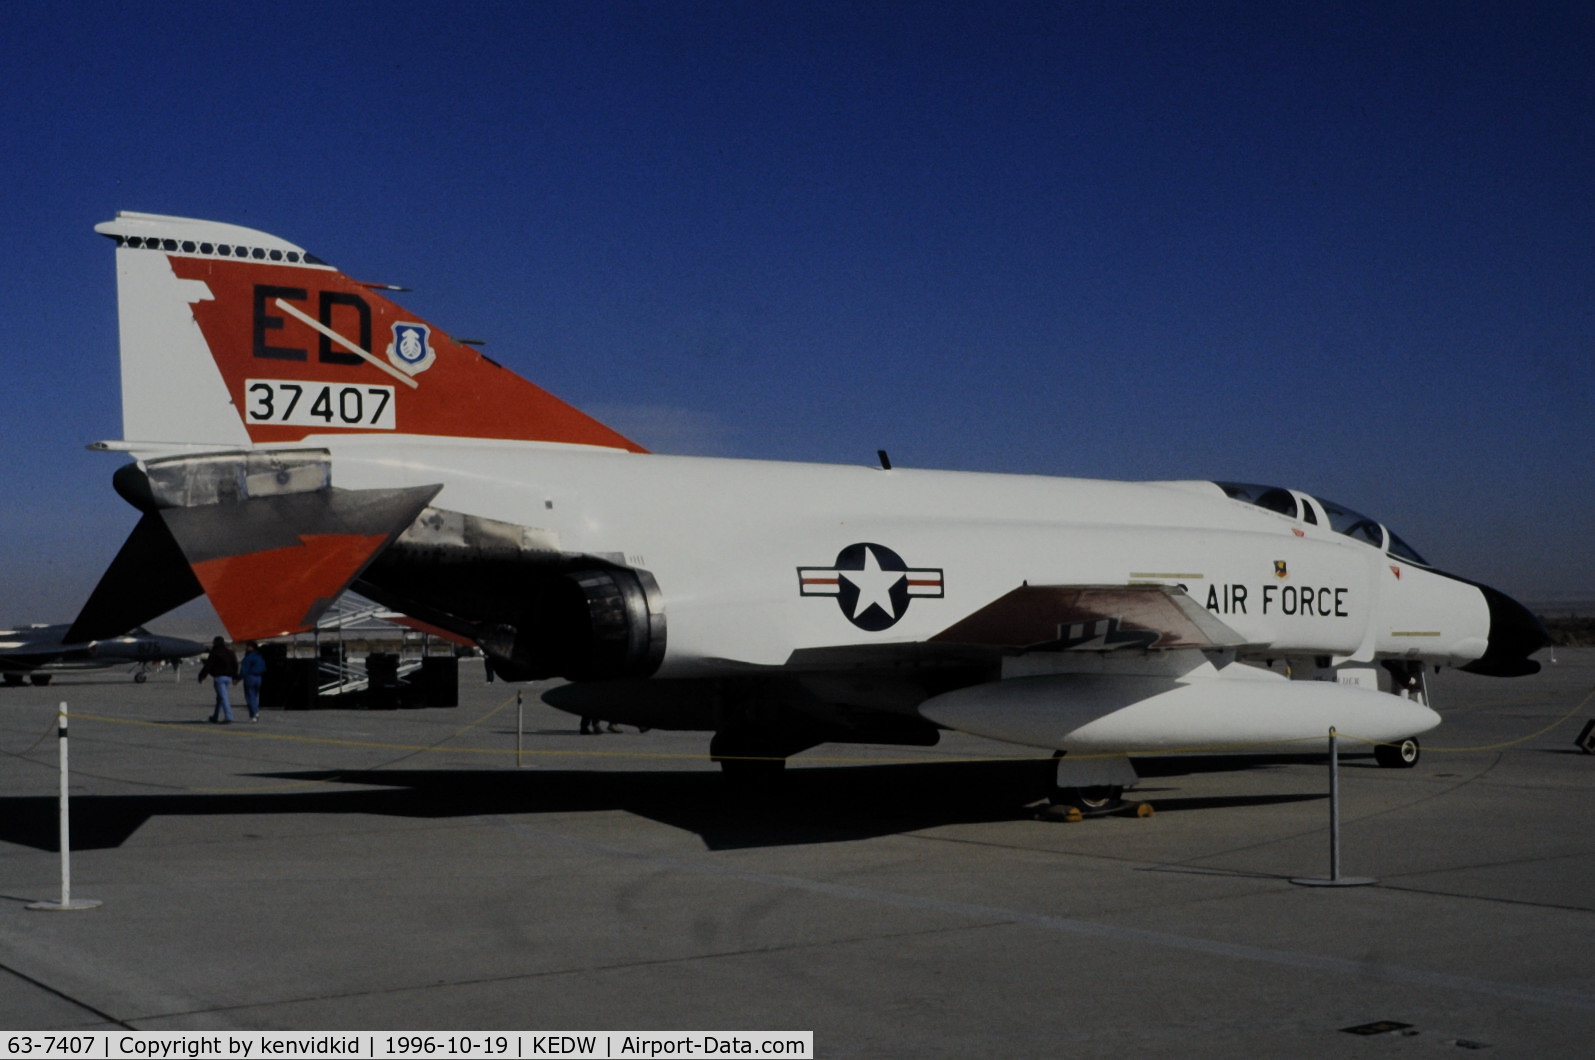 63-7407, 1963 McDonnell NF-4C Phantom C/N 311, On static display at the Edwards Open House 1996.